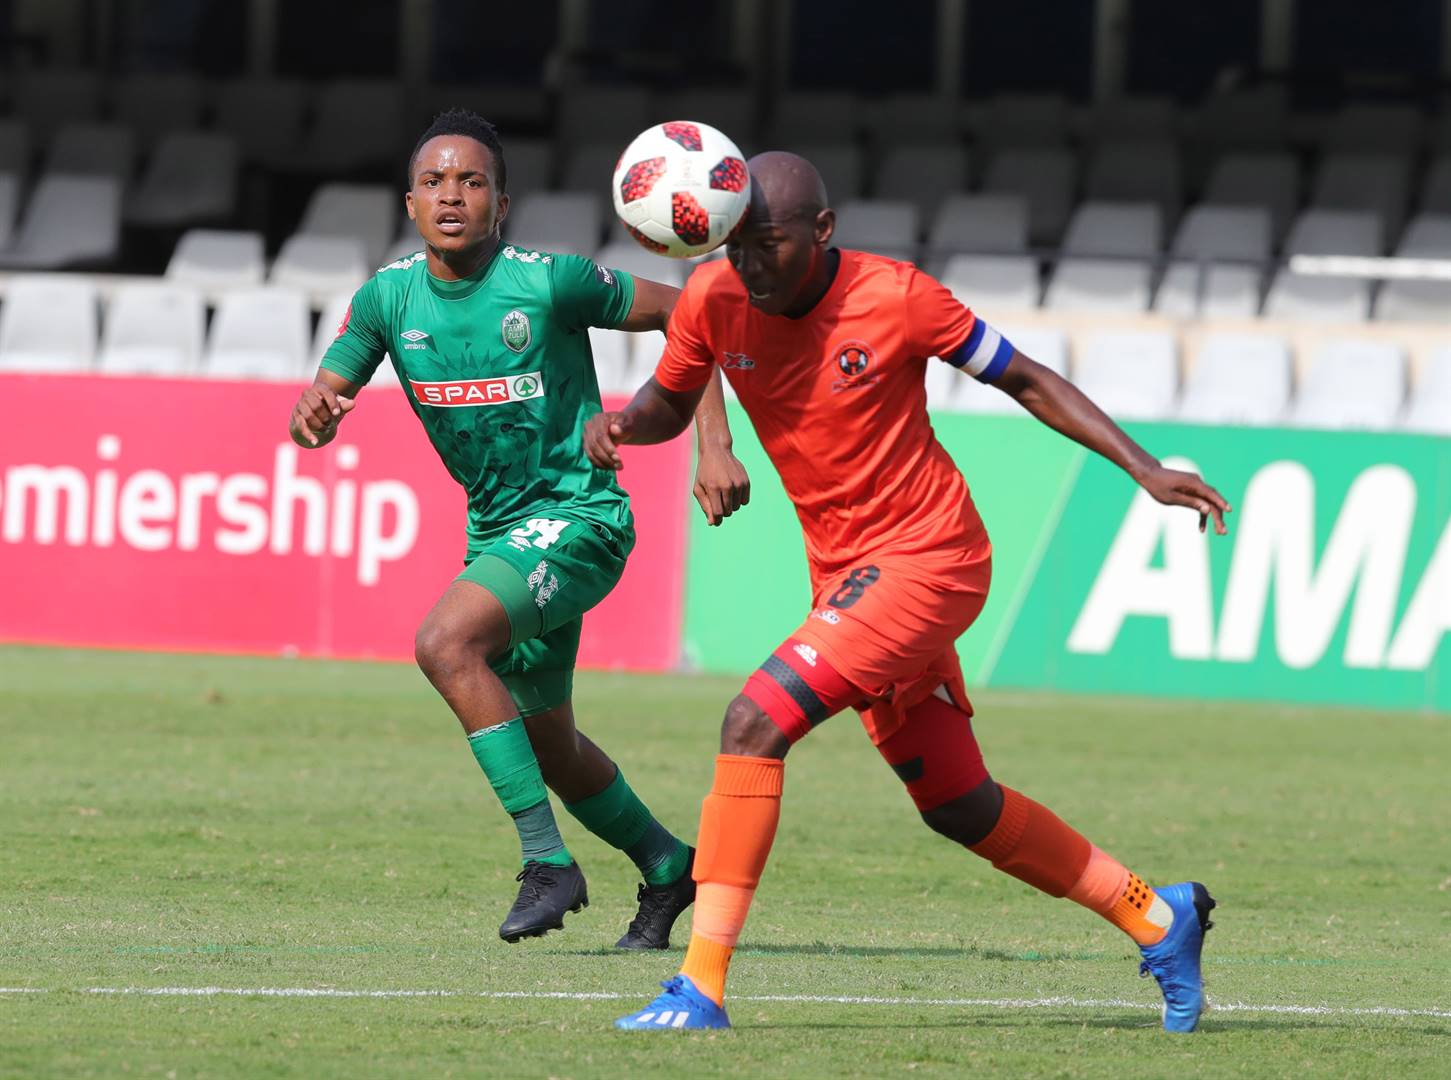 Polokwane City captain Jabulani Maluleke says the lockdown was a blessing in disguise Picture: Samuel Shivambu / BackpagePix